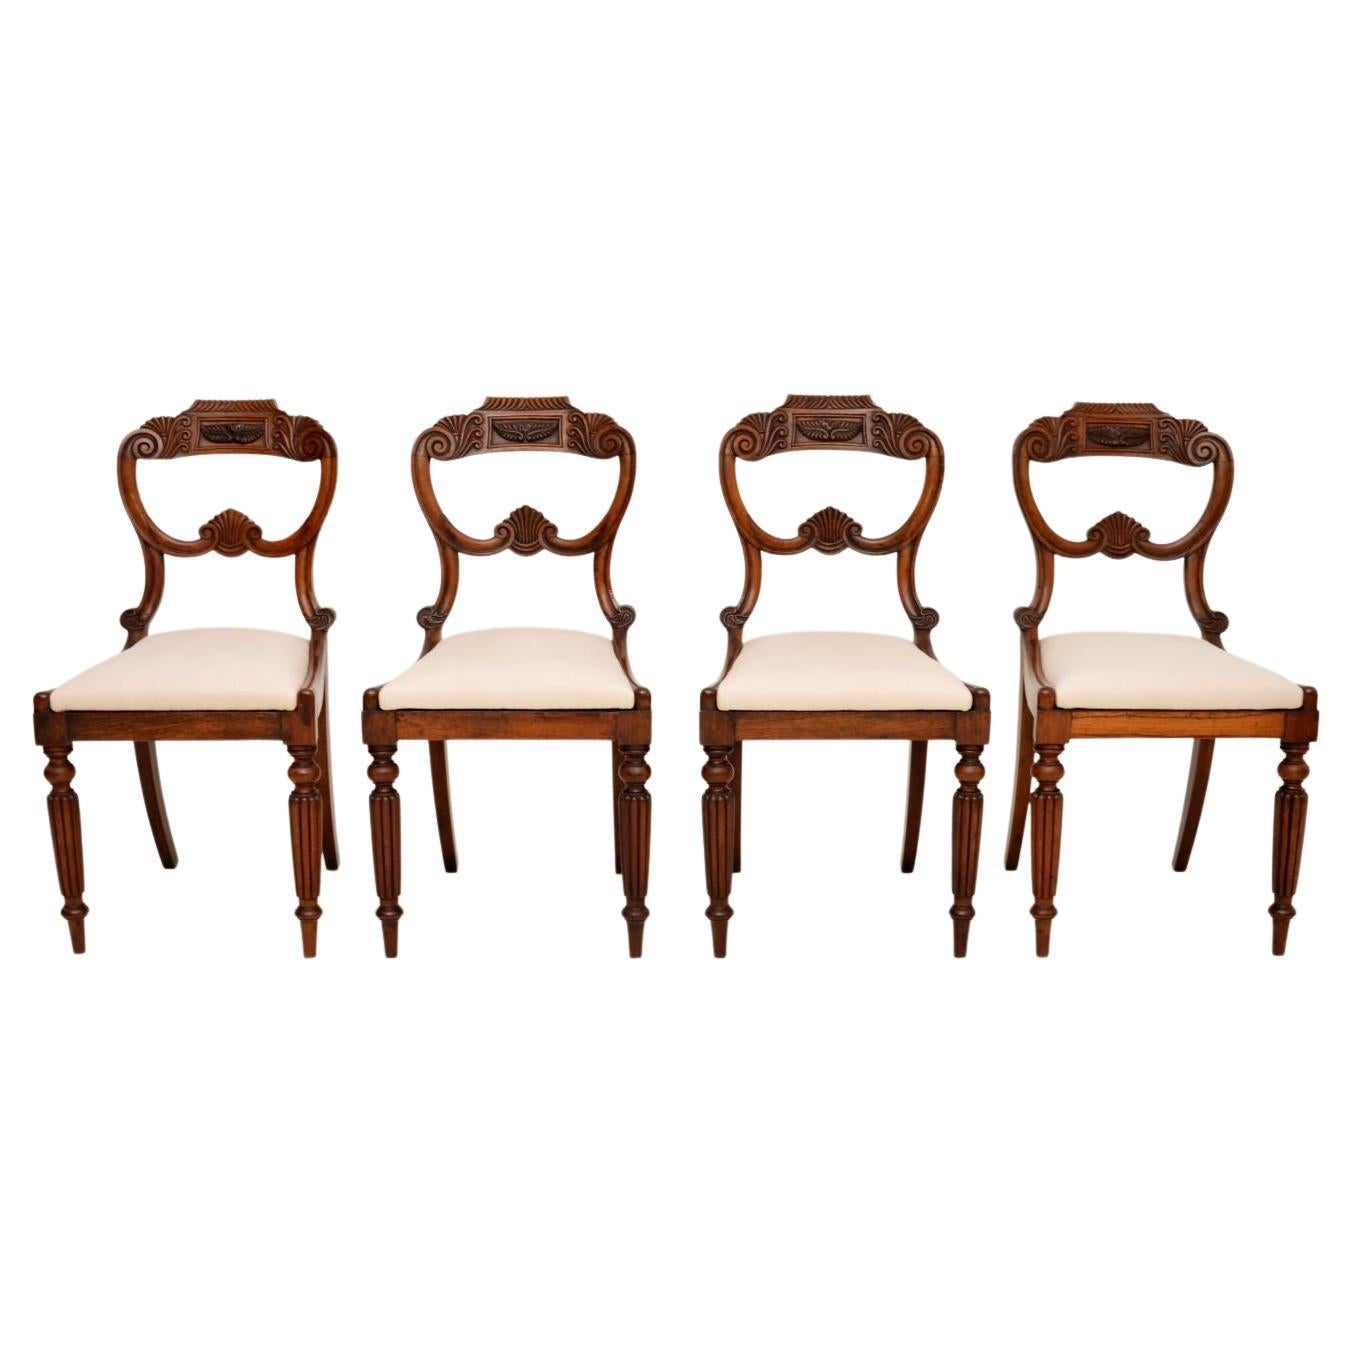 Set of 4 Antique Regency Dining Chairs